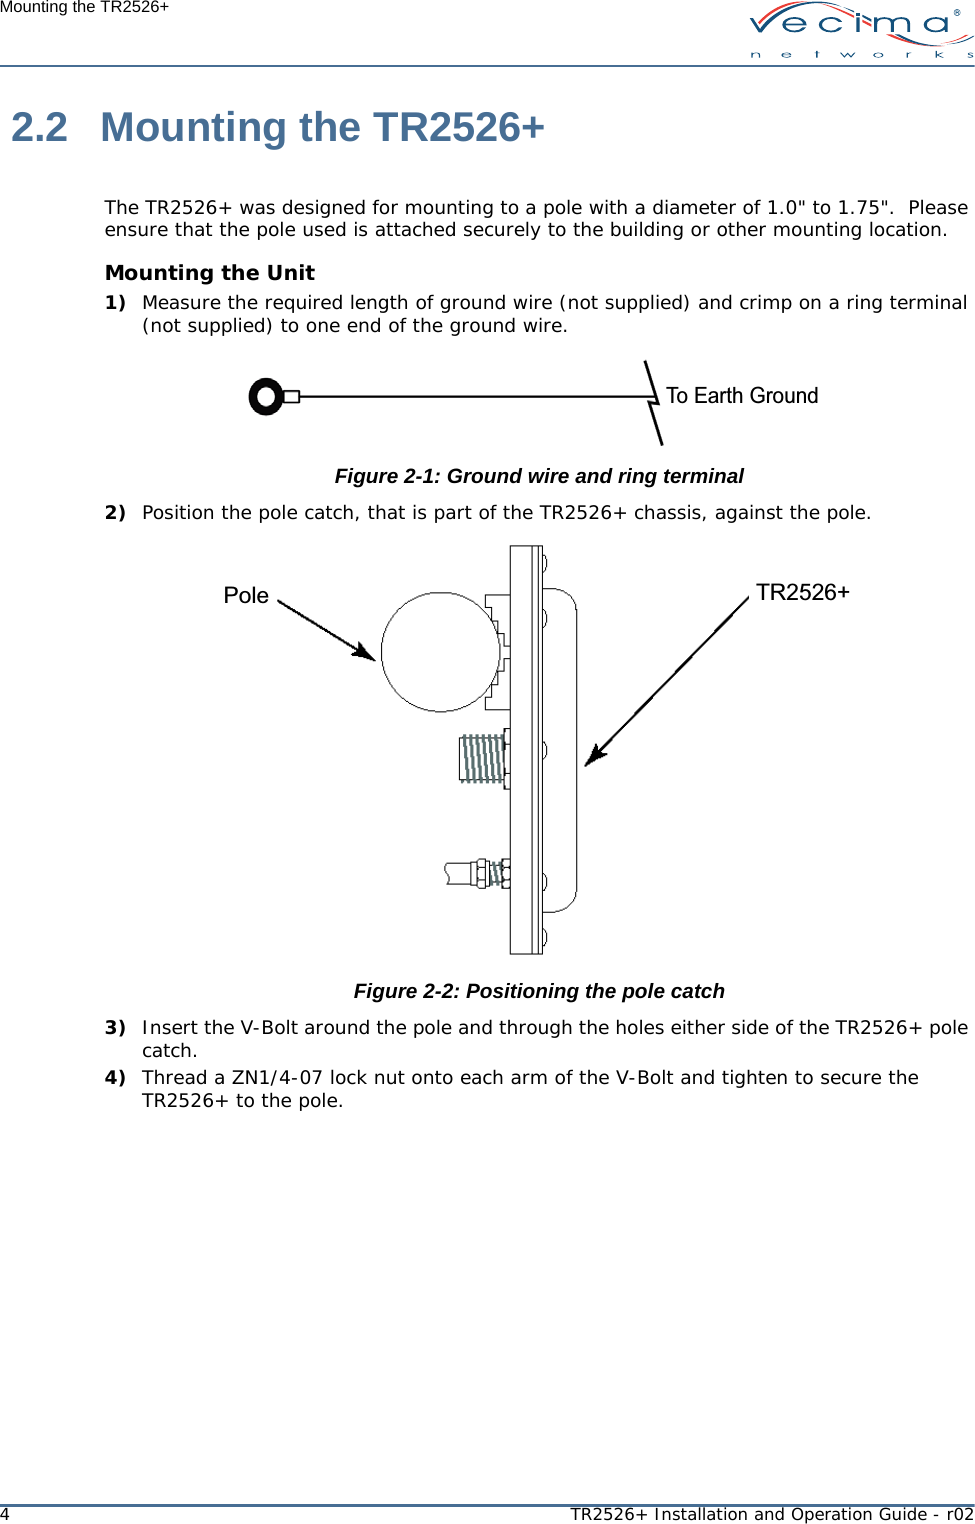 4TR2526+ Installation and Operation Guide - r02Mounting the TR2526+ 2.2 Mounting the TR2526+The TR2526+ was designed for mounting to a pole with a diameter of 1.0&quot; to 1.75&quot;.  Please ensure that the pole used is attached securely to the building or other mounting location.Mounting the Unit1) Measure the required length of ground wire (not supplied) and crimp on a ring terminal (not supplied) to one end of the ground wire.Figure 2-1: Ground wire and ring terminal2) Position the pole catch, that is part of the TR2526+ chassis, against the pole.Figure 2-2: Positioning the pole catch3) Insert the V-Bolt around the pole and through the holes either side of the TR2526+ pole catch.4) Thread a ZN1/4-07 lock nut onto each arm of the V-Bolt and tighten to secure the TR2526+ to the pole.To Earth GroundTR2526+Pole